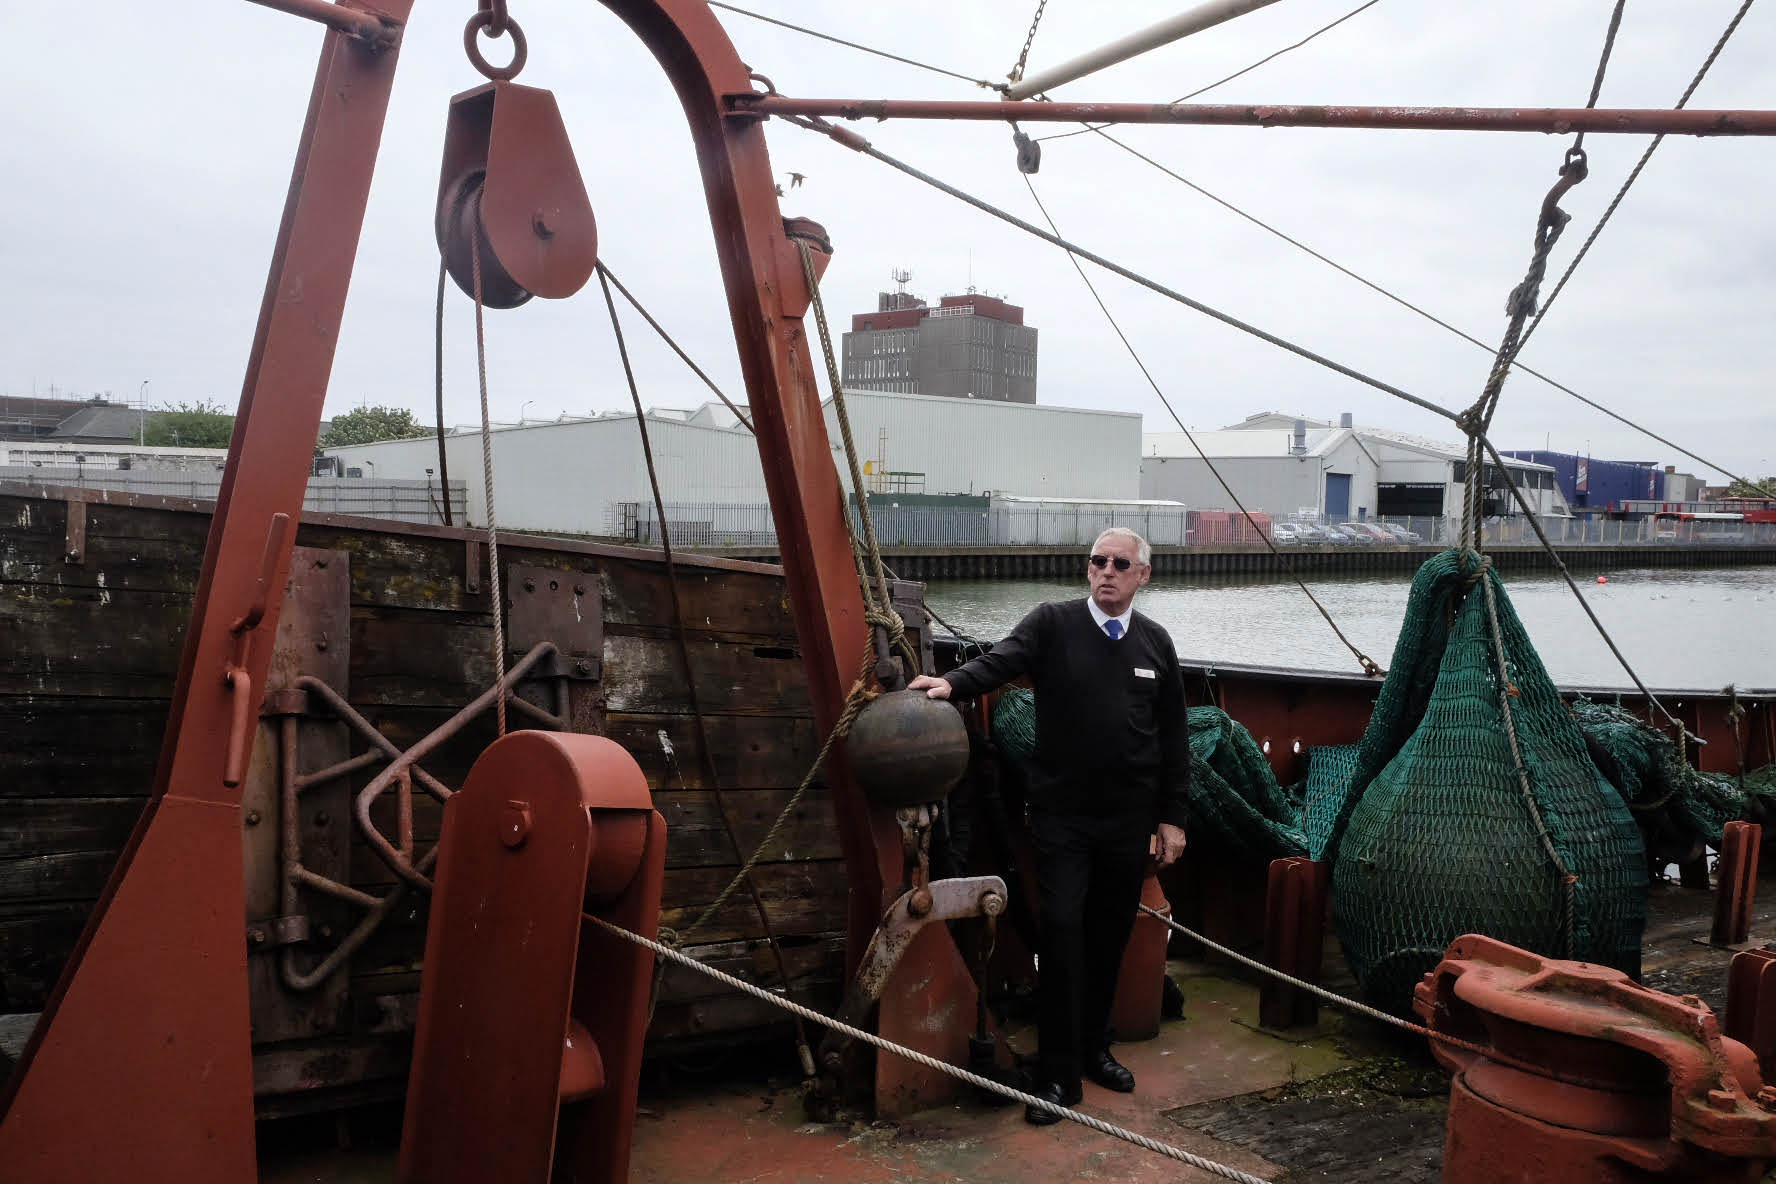 John Vincent conducts a tour on the Ross Tiger, now a part of the Grimsby Heritage Centre in the town of Grimsby, U.K., on May 28, 2015.